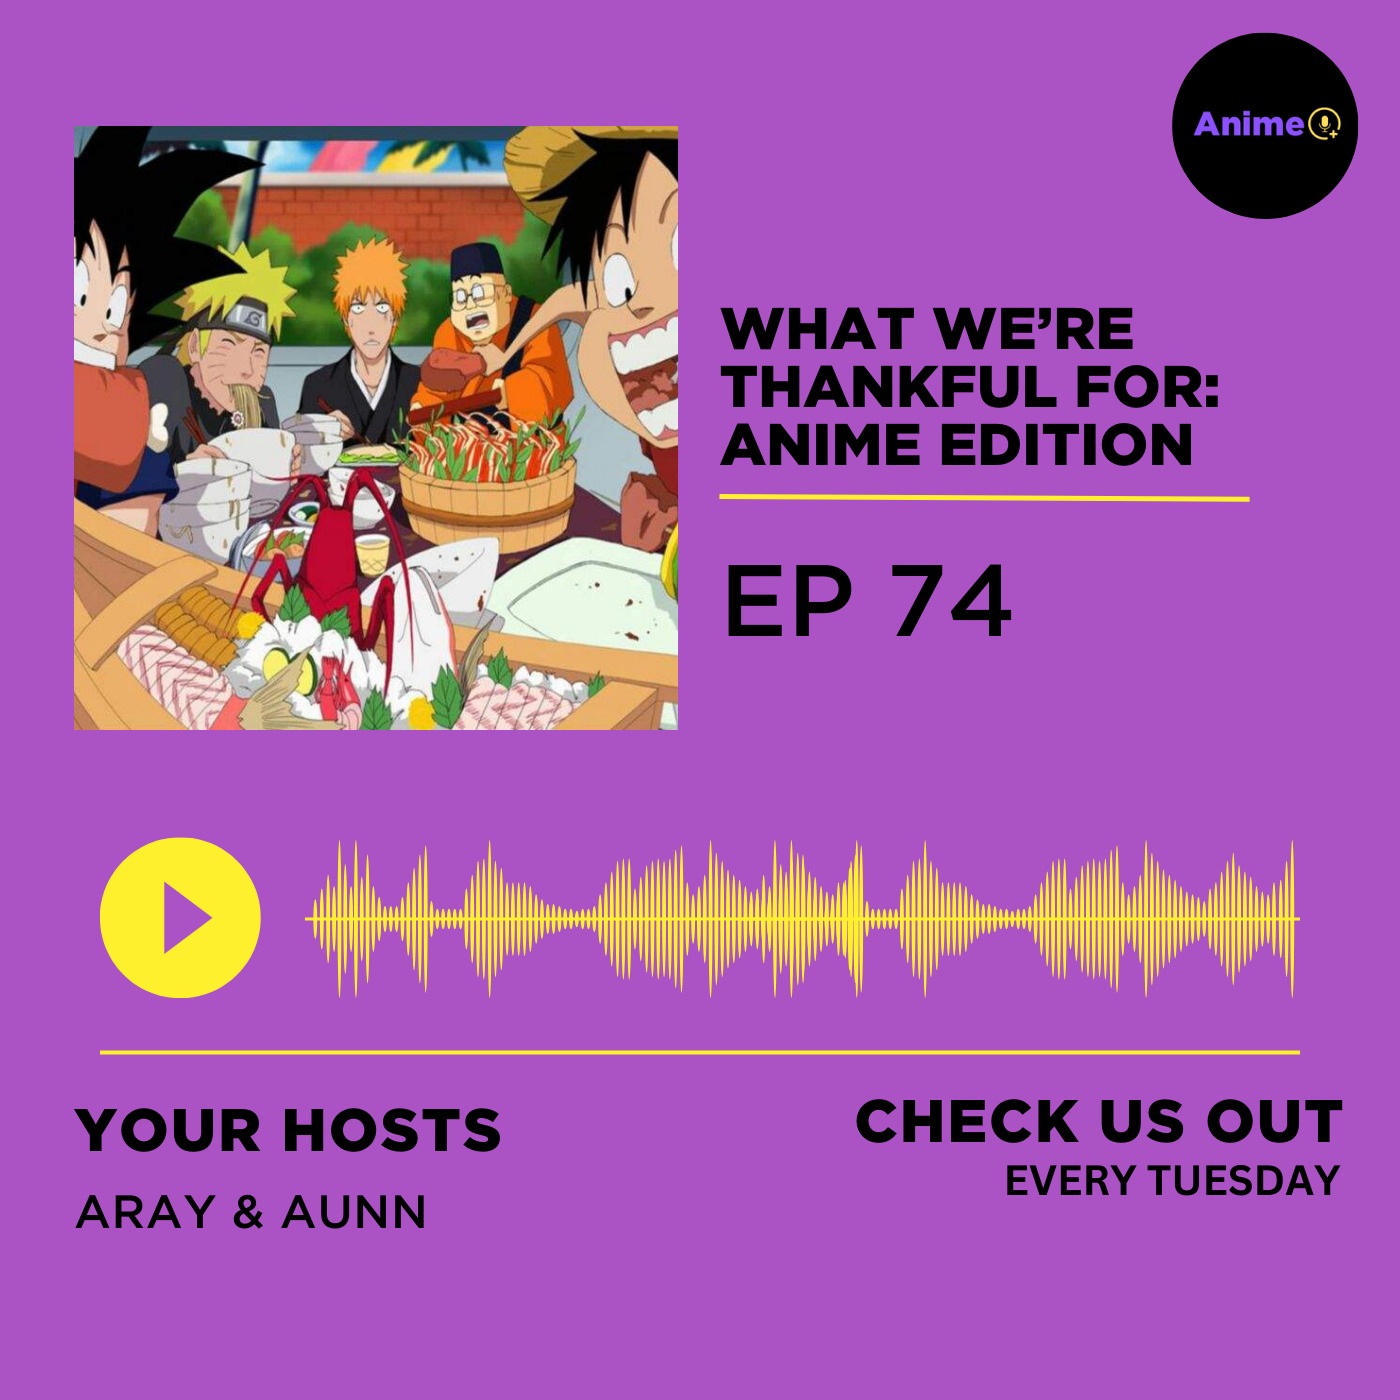 Anime Trending - Our Discord server has evolved to accommodate anime  discussion channels! Come share your hot takes: discord.gg/anitrendz